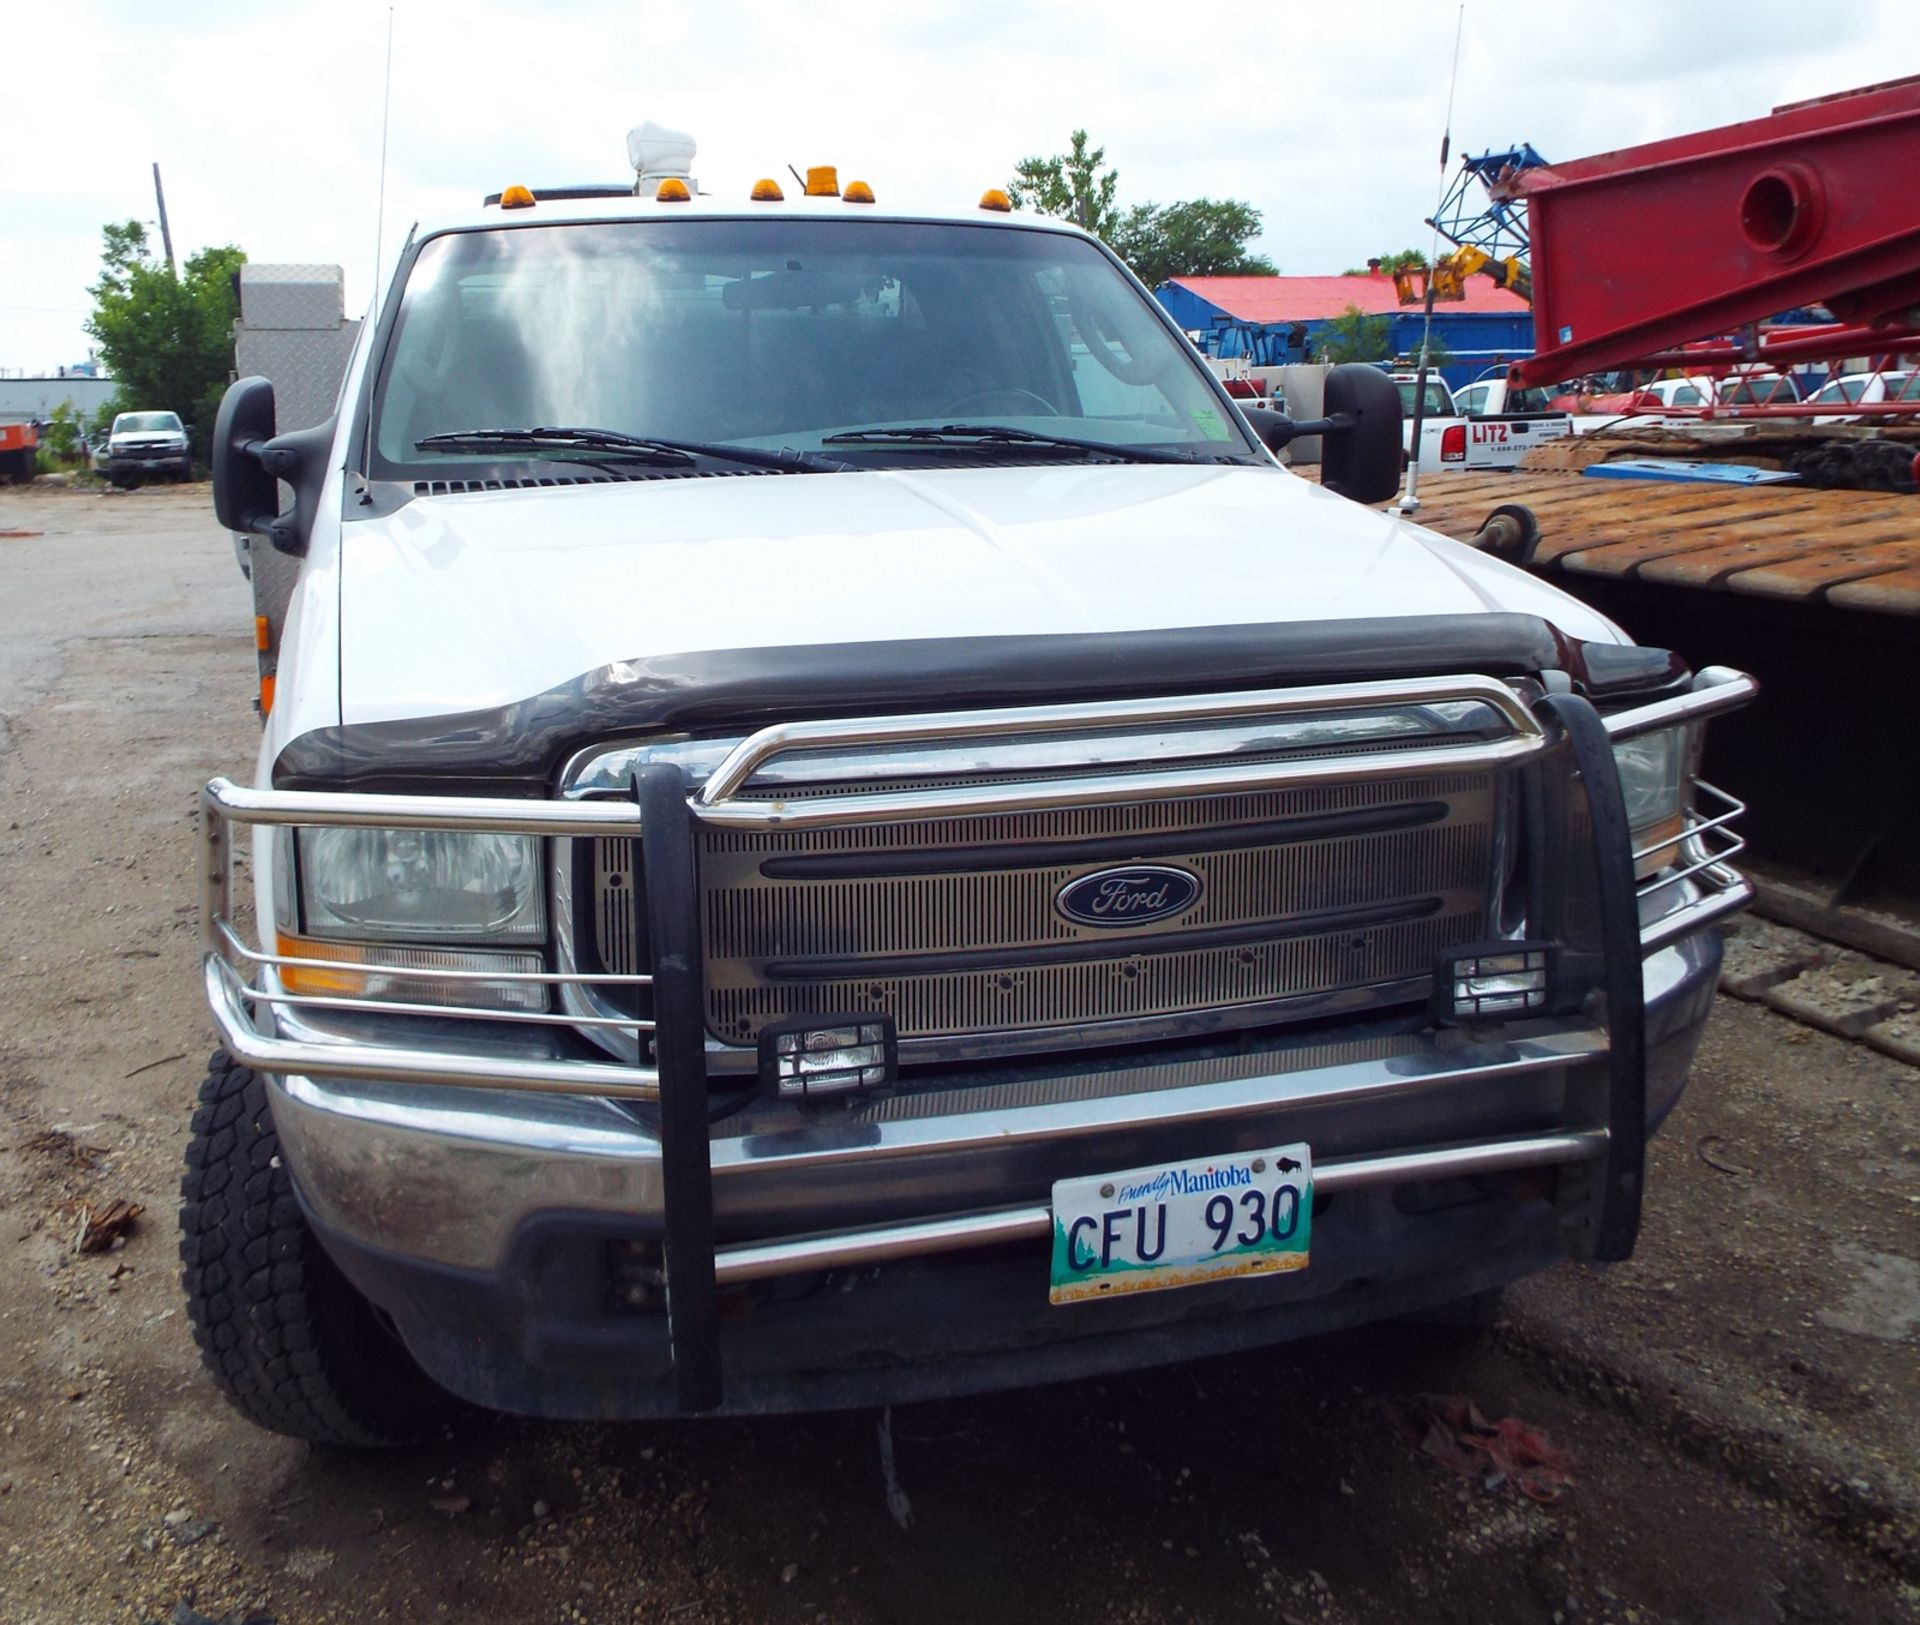 FORD (2004) F450 XLT SUPER DUTY EXTENDED CAB SERVICE TRUCK, POWERSTROKE V8 DIESEL ENGINE,